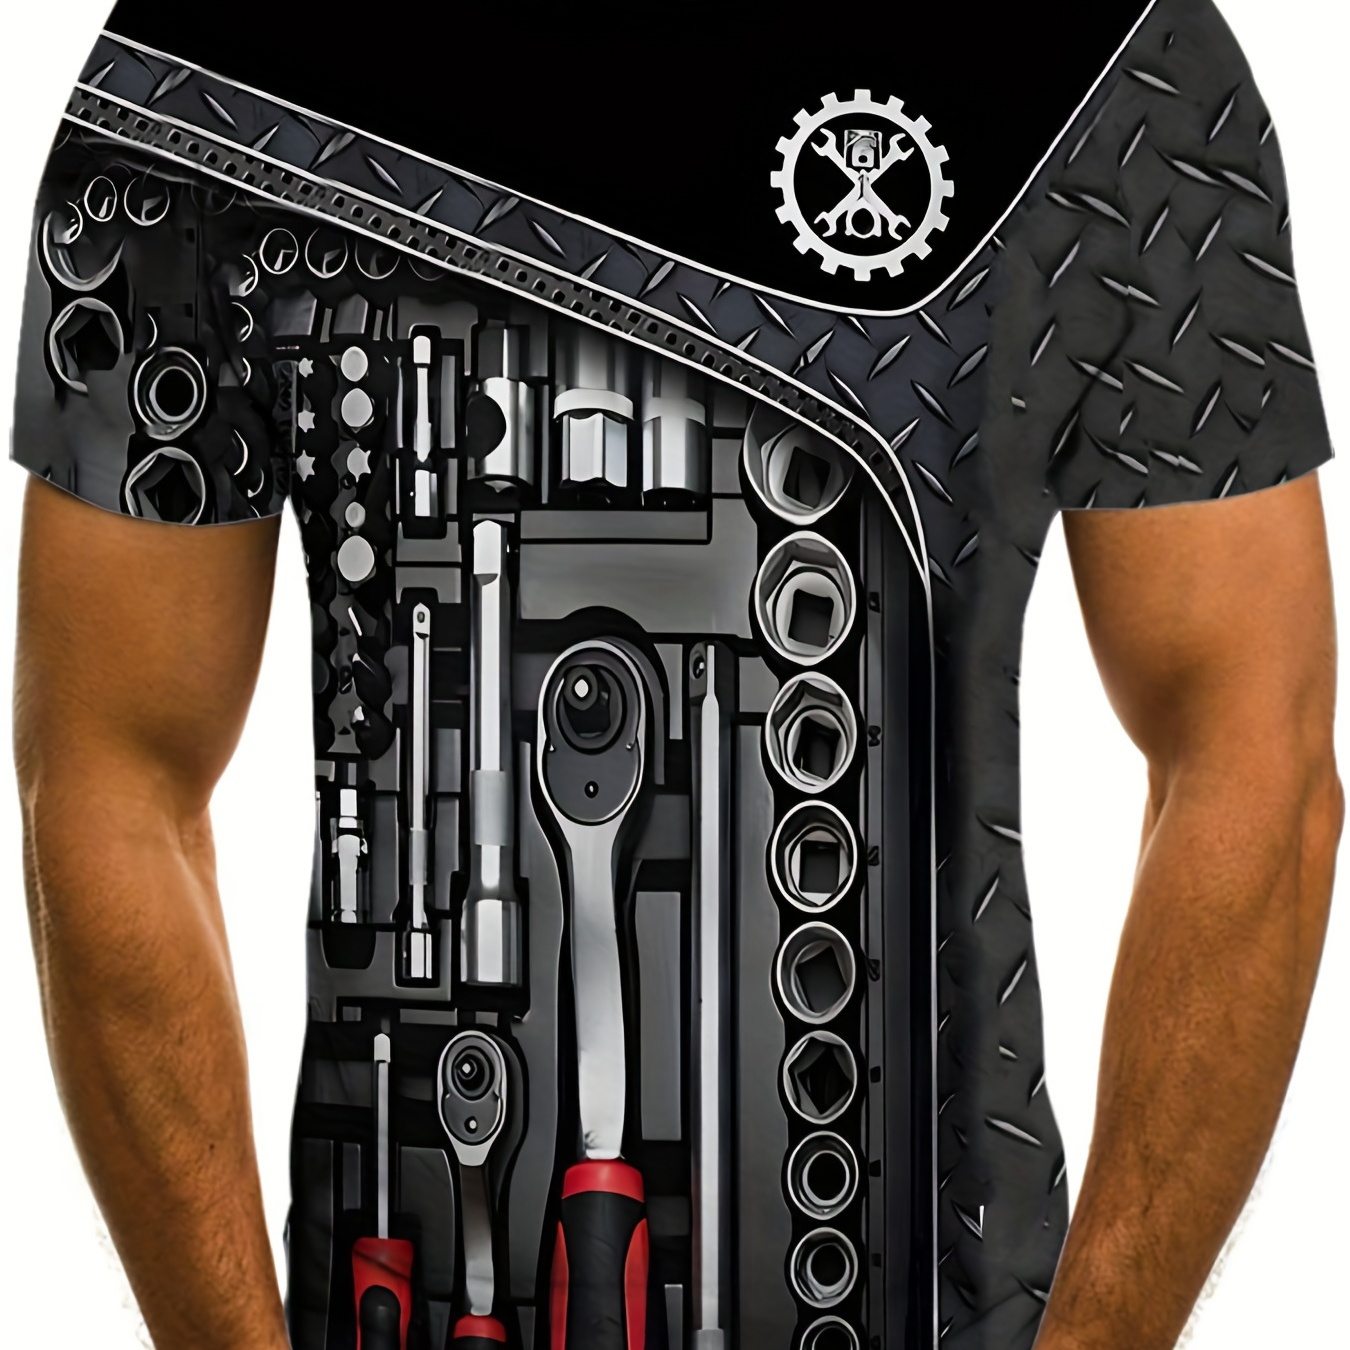 

Mechanic Tool Box Print T-shirt, Men's Casual Street Style Stretch Round Neck Tee Shirt For Summer